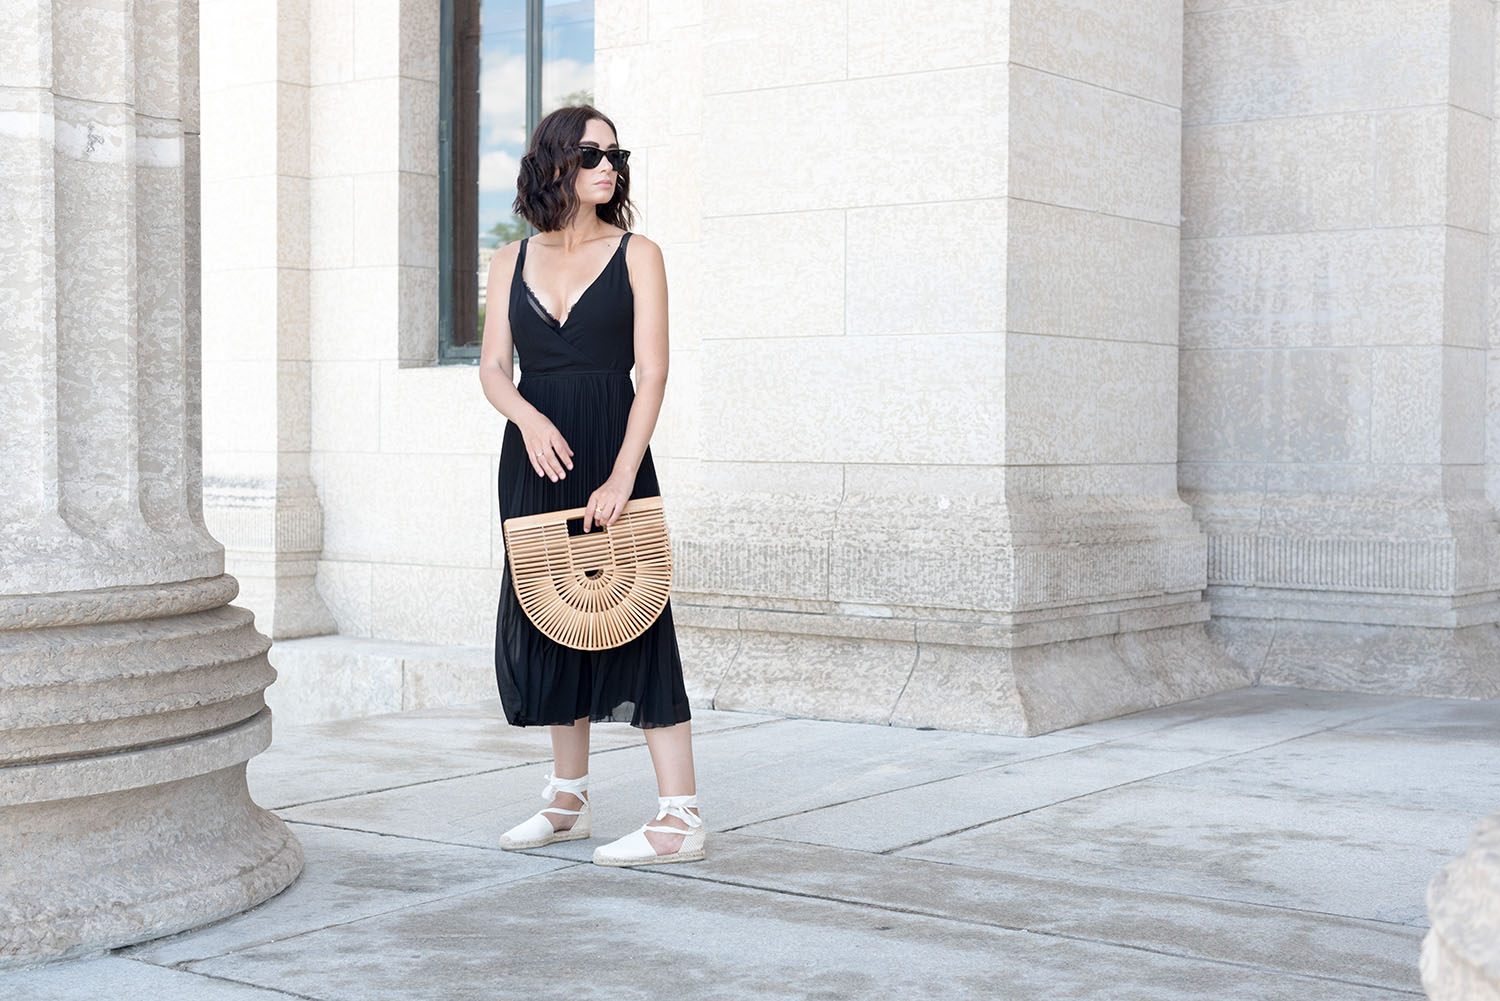 Top Winnipeg fashion blogger Cee Fardoe of Coco & Vera wears and Aritzia Beaune dress and carries a vintage cage bag